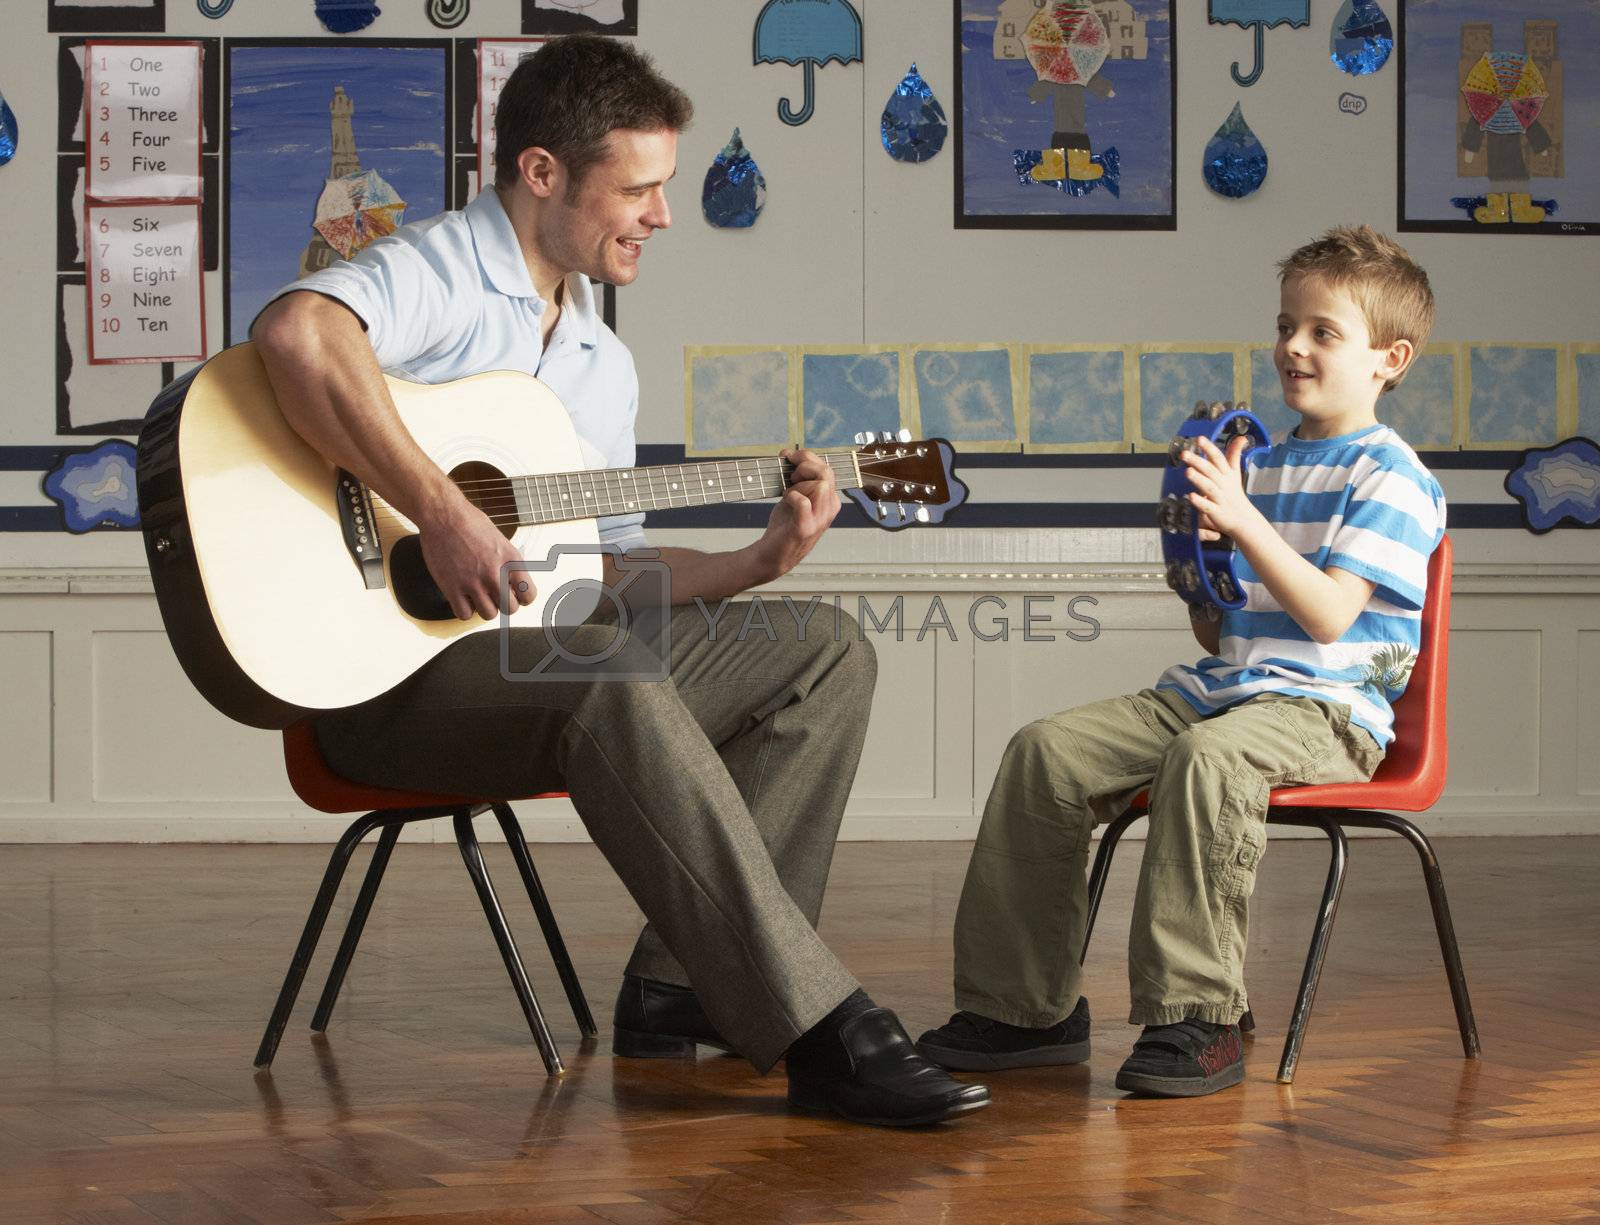 Royalty free image of Male Teacher Playing Guitar With Pupil In Classroom by omg_images